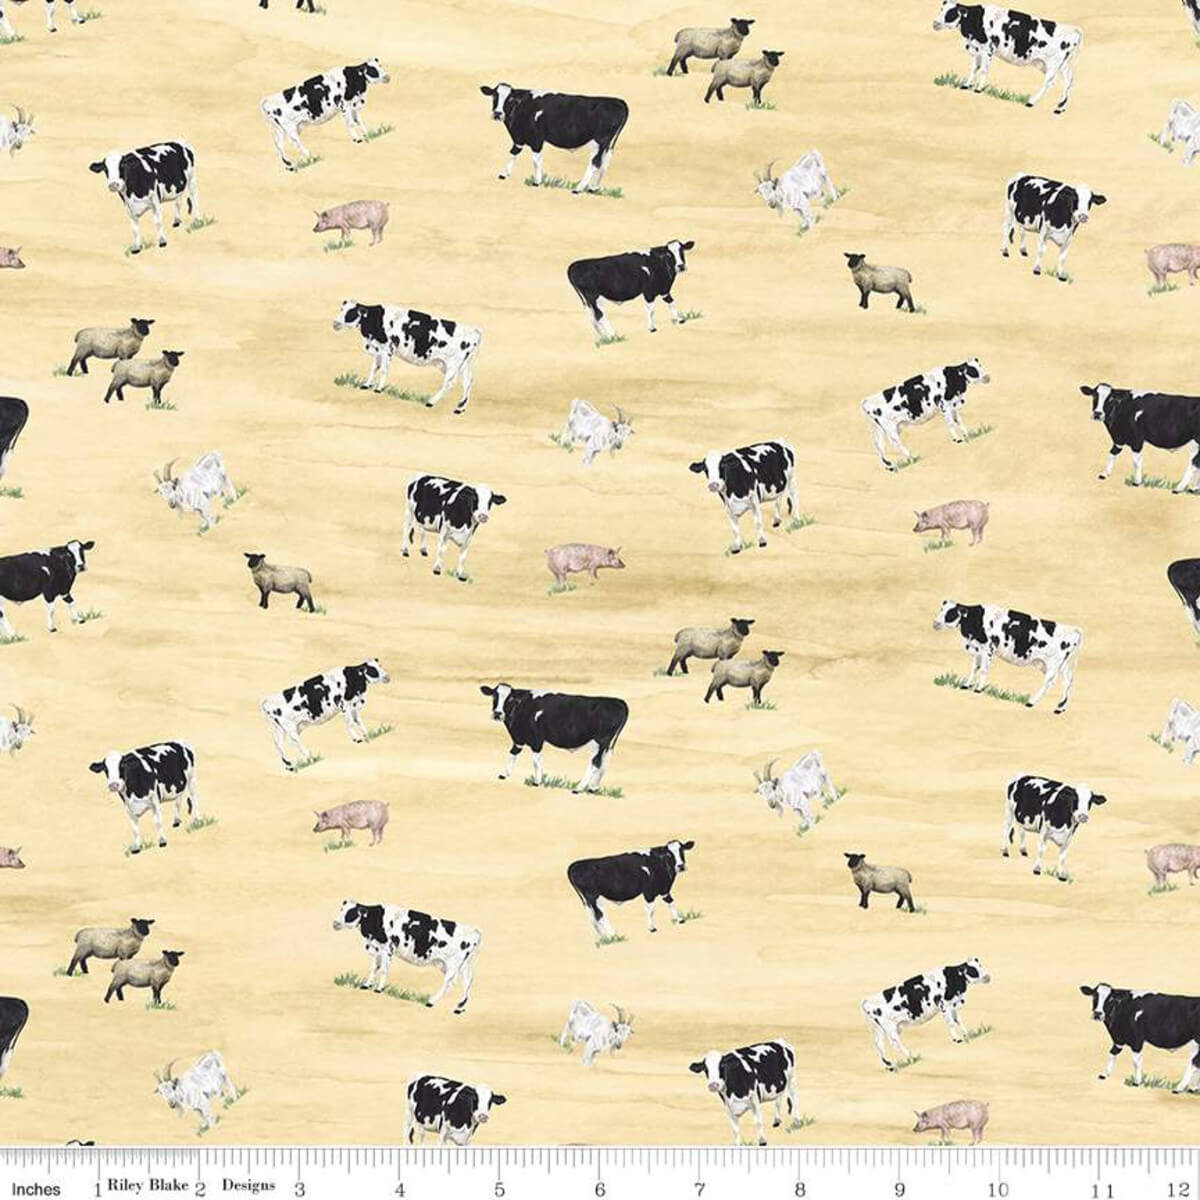 Barn Quilts Fabric available at Nancy Zieman Productions at ShopNZP